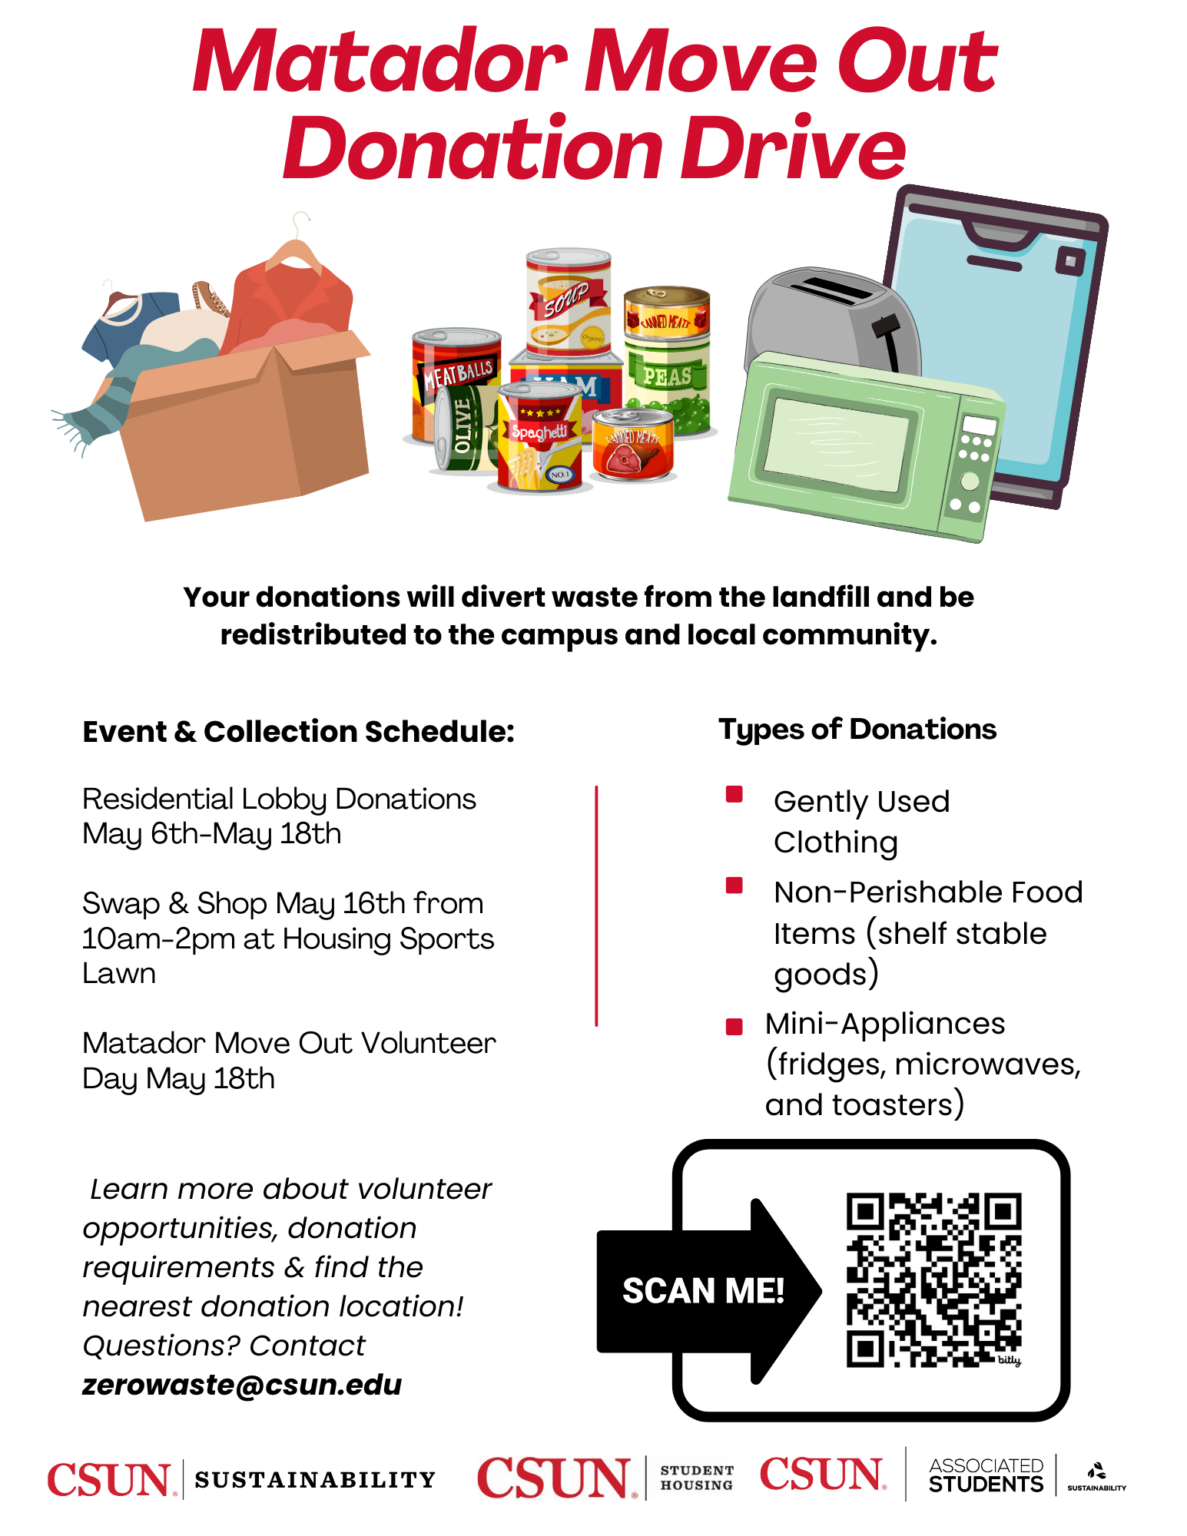 A flyer promoting the Matador Move Out Donation Drive.